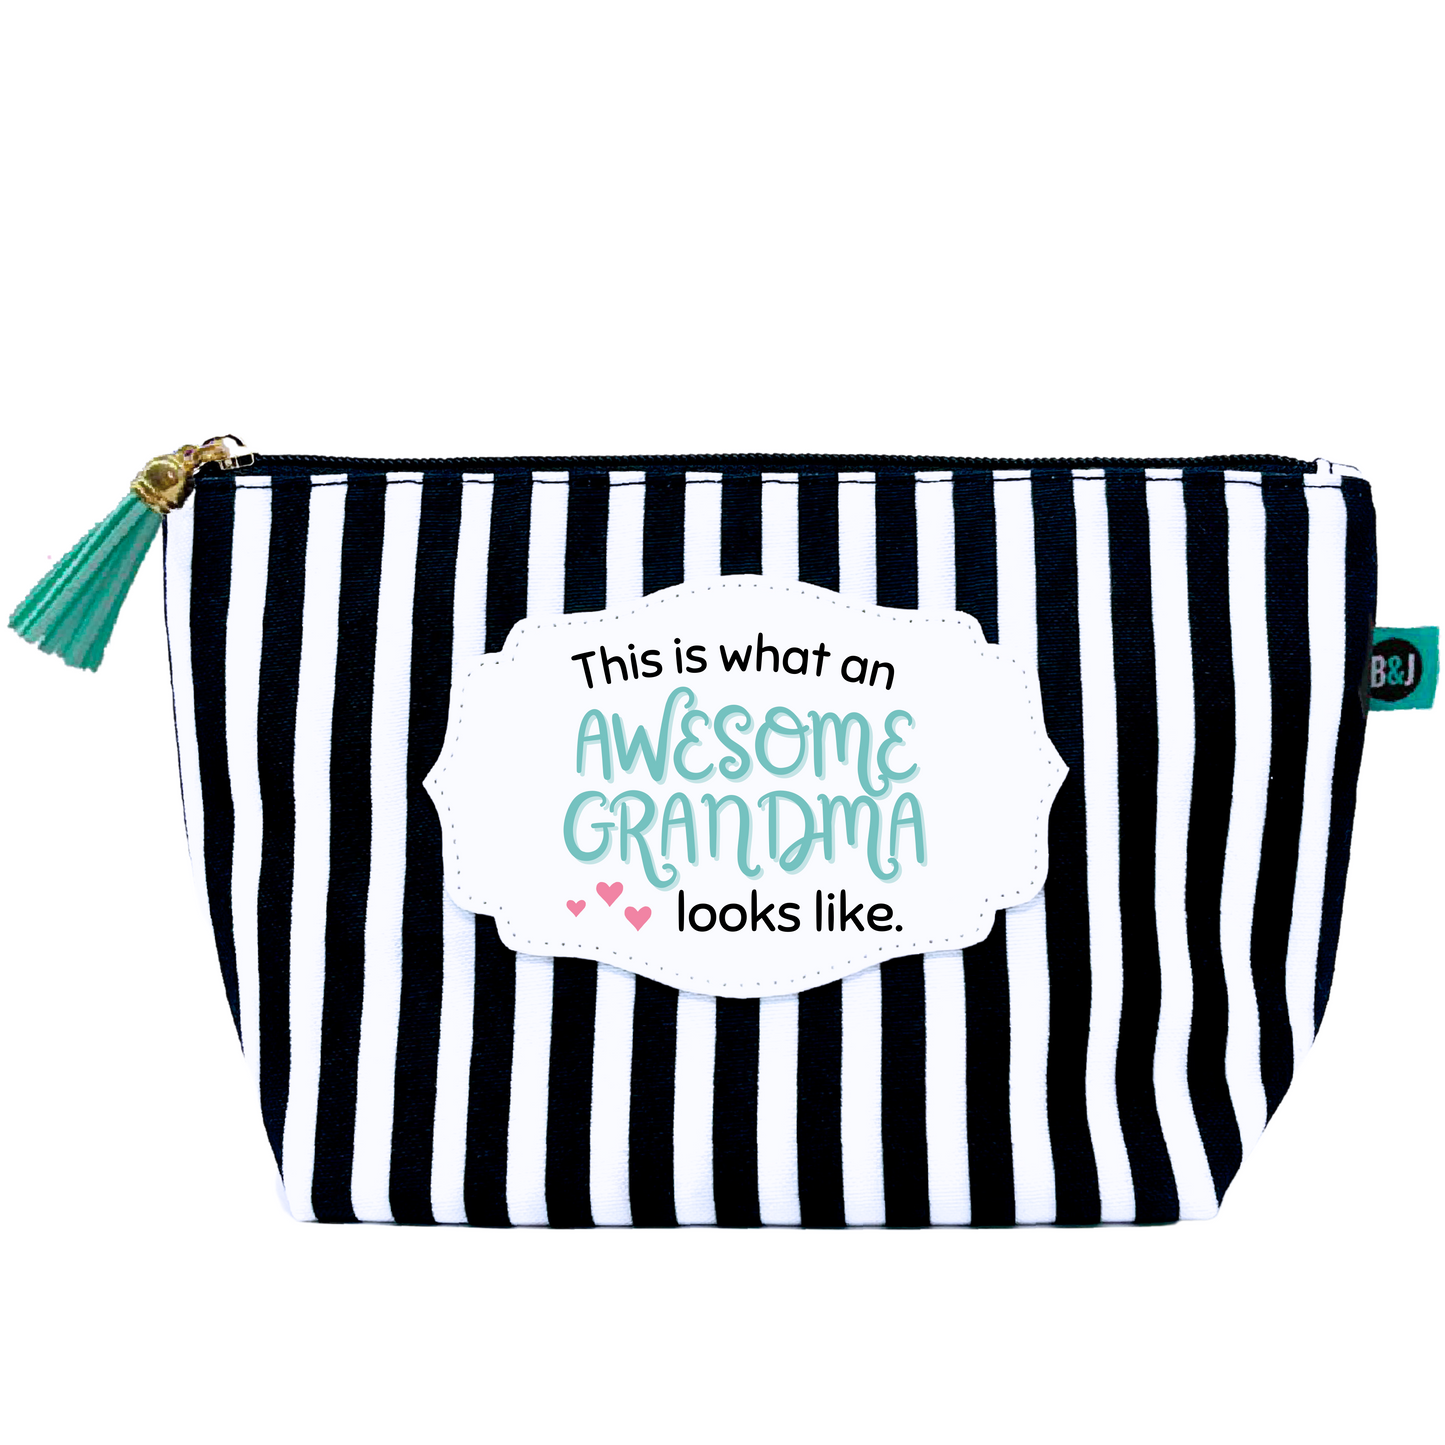 Grandma Awesome Janie Pouch Gifts for Women Striped Makeup Bags Cosmetic Bag Travel Toiletry Makeup Pouch Pencil Bag with Zipper Best Granny Birthday Just Because Gifts